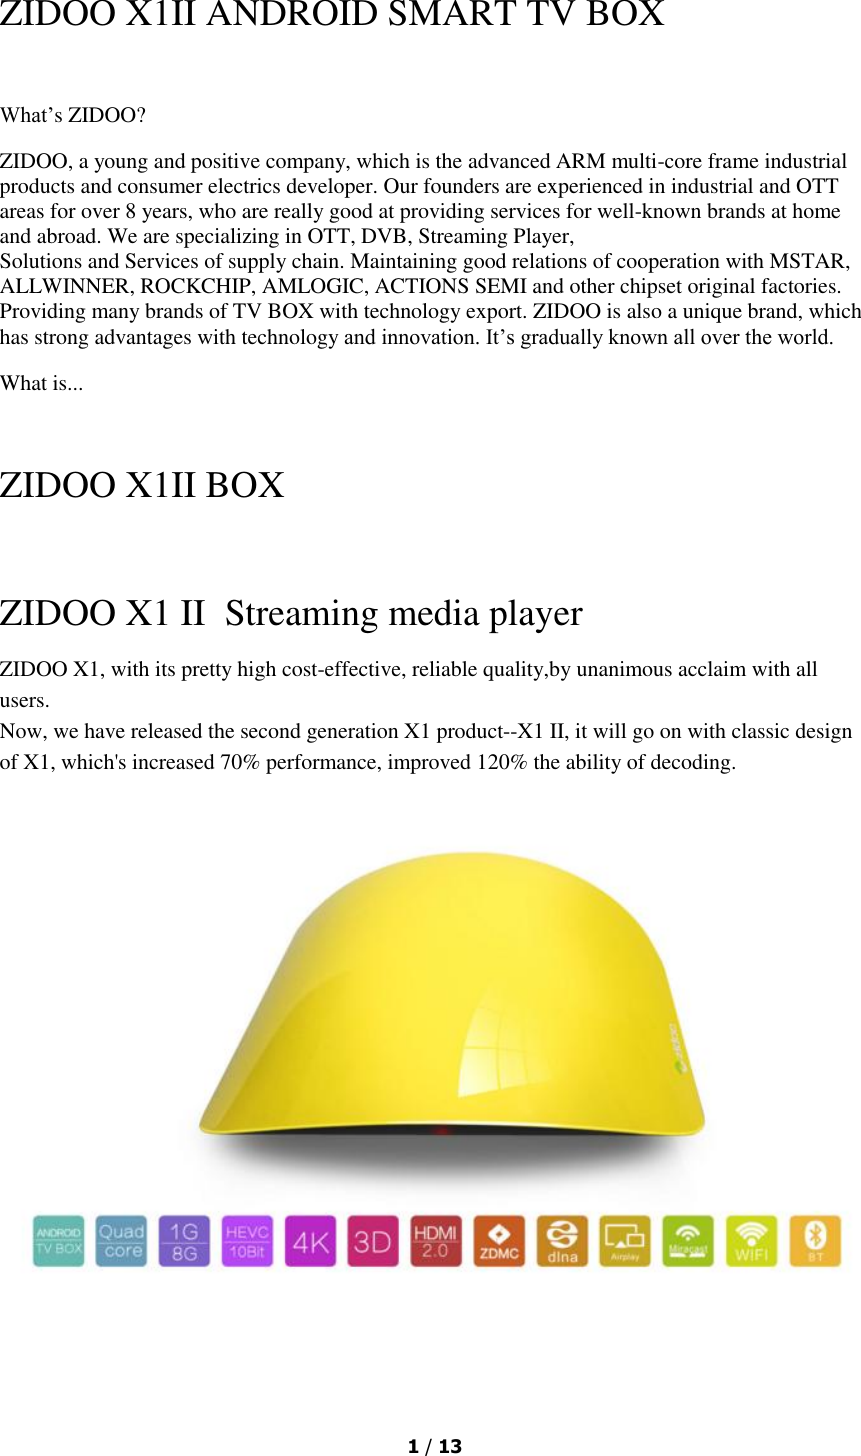  1 / 13  ZIDOO X1II ANDROID SMART TV BOX  What’s ZIDOO? ZIDOO, a young and positive company, which is the advanced ARM multi-core frame industrial products and consumer electrics developer. Our founders are experienced in industrial and OTT areas for over 8 years, who are really good at providing services for well-known brands at home and abroad. We are specializing in OTT, DVB, Streaming Player, Solutions and Services of supply chain. Maintaining good relations of cooperation with MSTAR,  ALLWINNER, ROCKCHIP, AMLOGIC, ACTIONS SEMI and other chipset original factories. Providing many brands of TV BOX with technology export. ZIDOO is also a unique brand, which has strong advantages with technology and innovation. It’s gradually known all over the world. What is...   ZIDOO X1II BOX  ZIDOO X1 II  Streaming media player ZIDOO X1, with its pretty high cost-effective, reliable quality,by unanimous acclaim with all users. Now, we have released the second generation X1 product--X1 II, it will go on with classic design of X1, which&apos;s increased 70% performance, improved 120% the ability of decoding.   